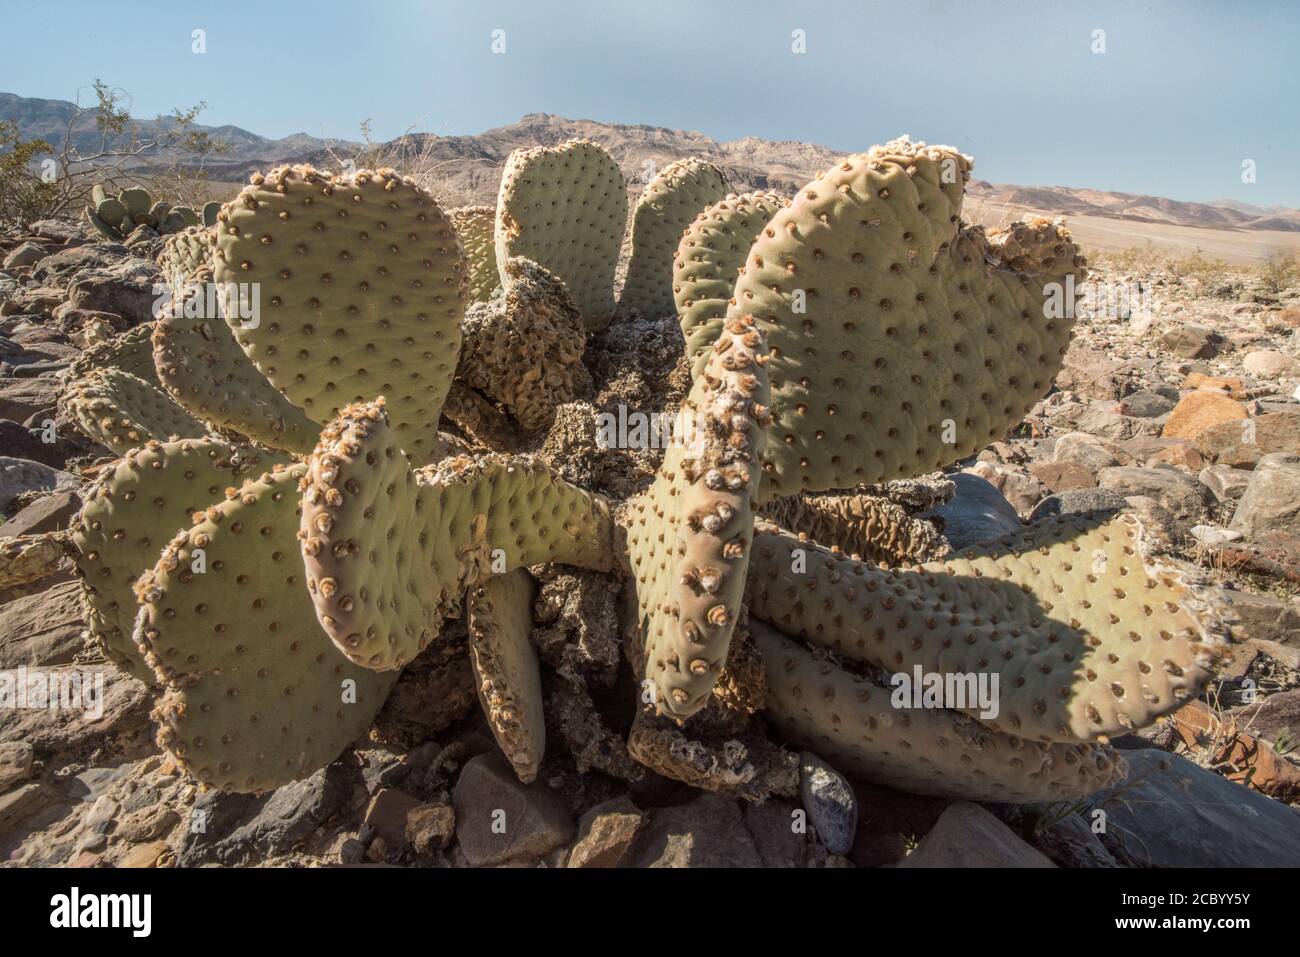 The Beavertail Cactus (Opuntia basilaris) one of the cacti that are able to survive and grow in Death Valley National Park, California. Stock Photo